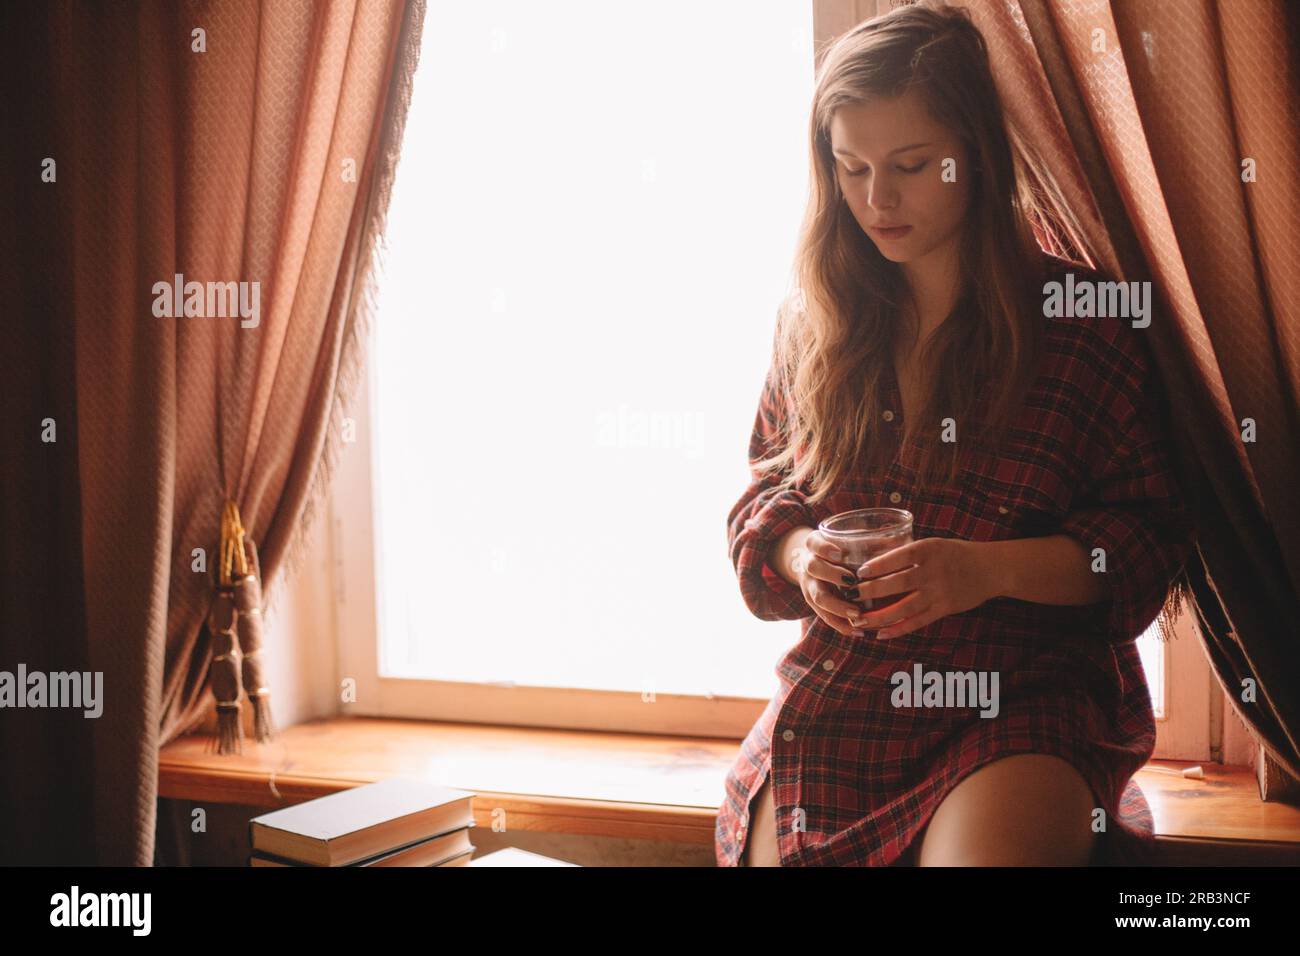 Young woman holding cup of tea while sitting on window sill Stock Photo